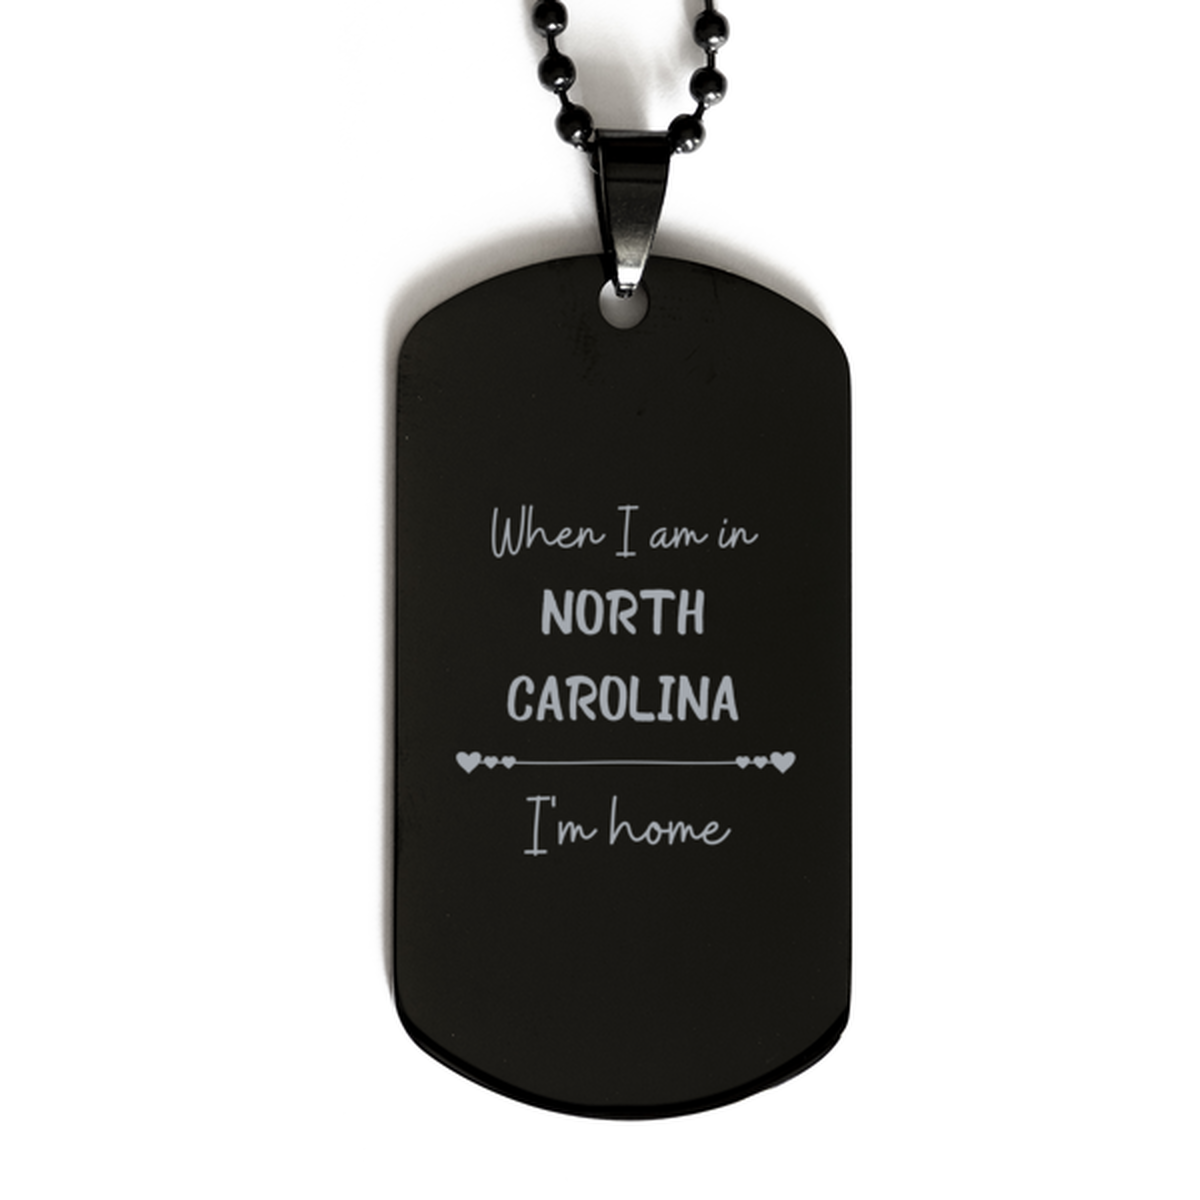 When I am in North Carolina I'm home Black Dog Tag, Cheap Gifts For North Carolina, State North Carolina Birthday Gifts for Friends Coworker